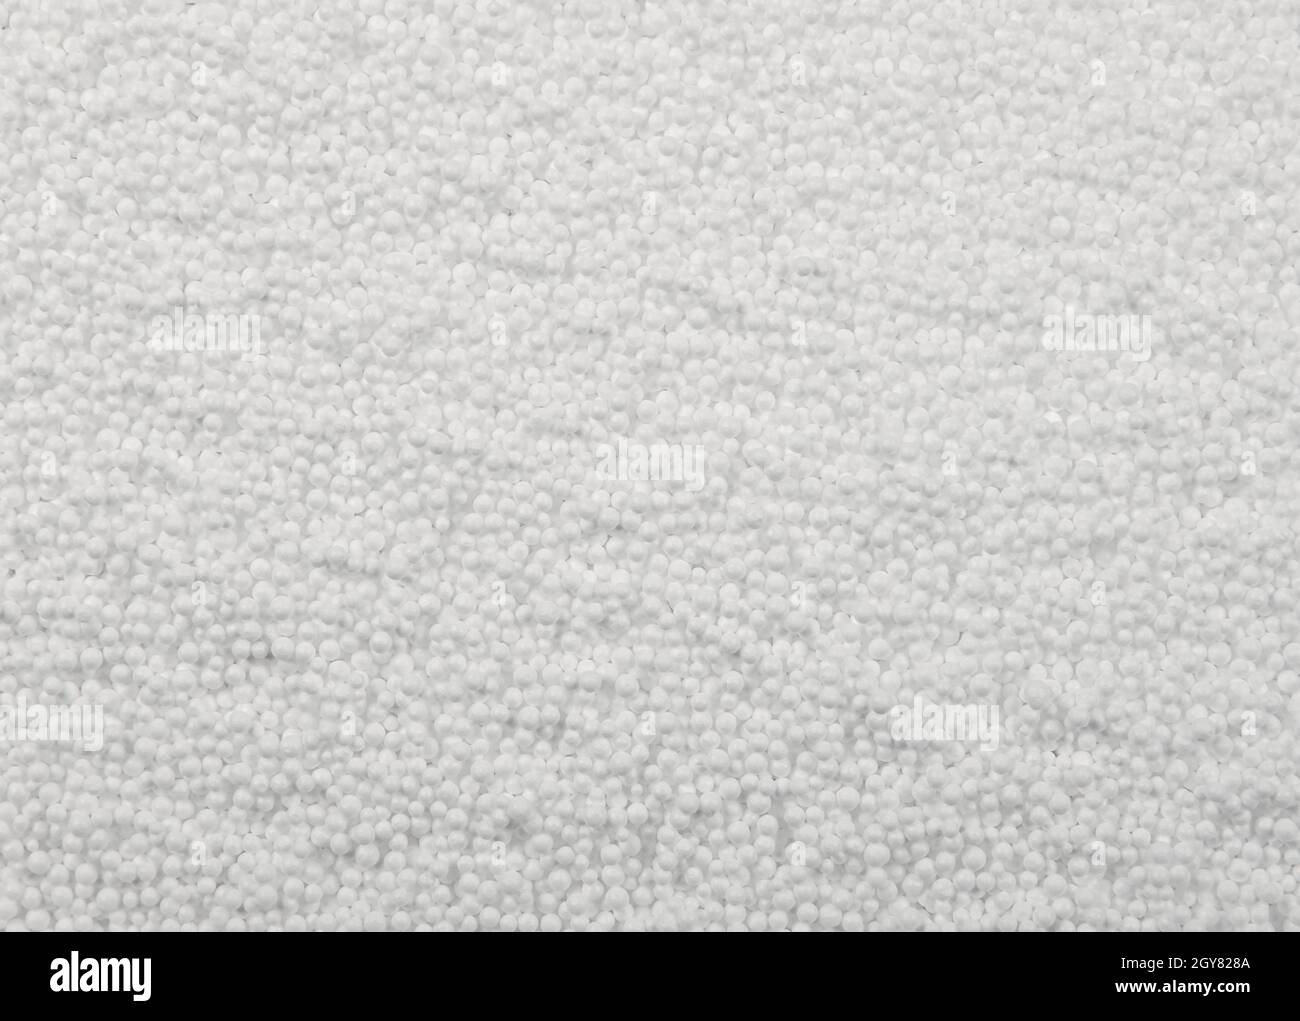 Close up background texture of white expanded polystyrene balls Stock Photo